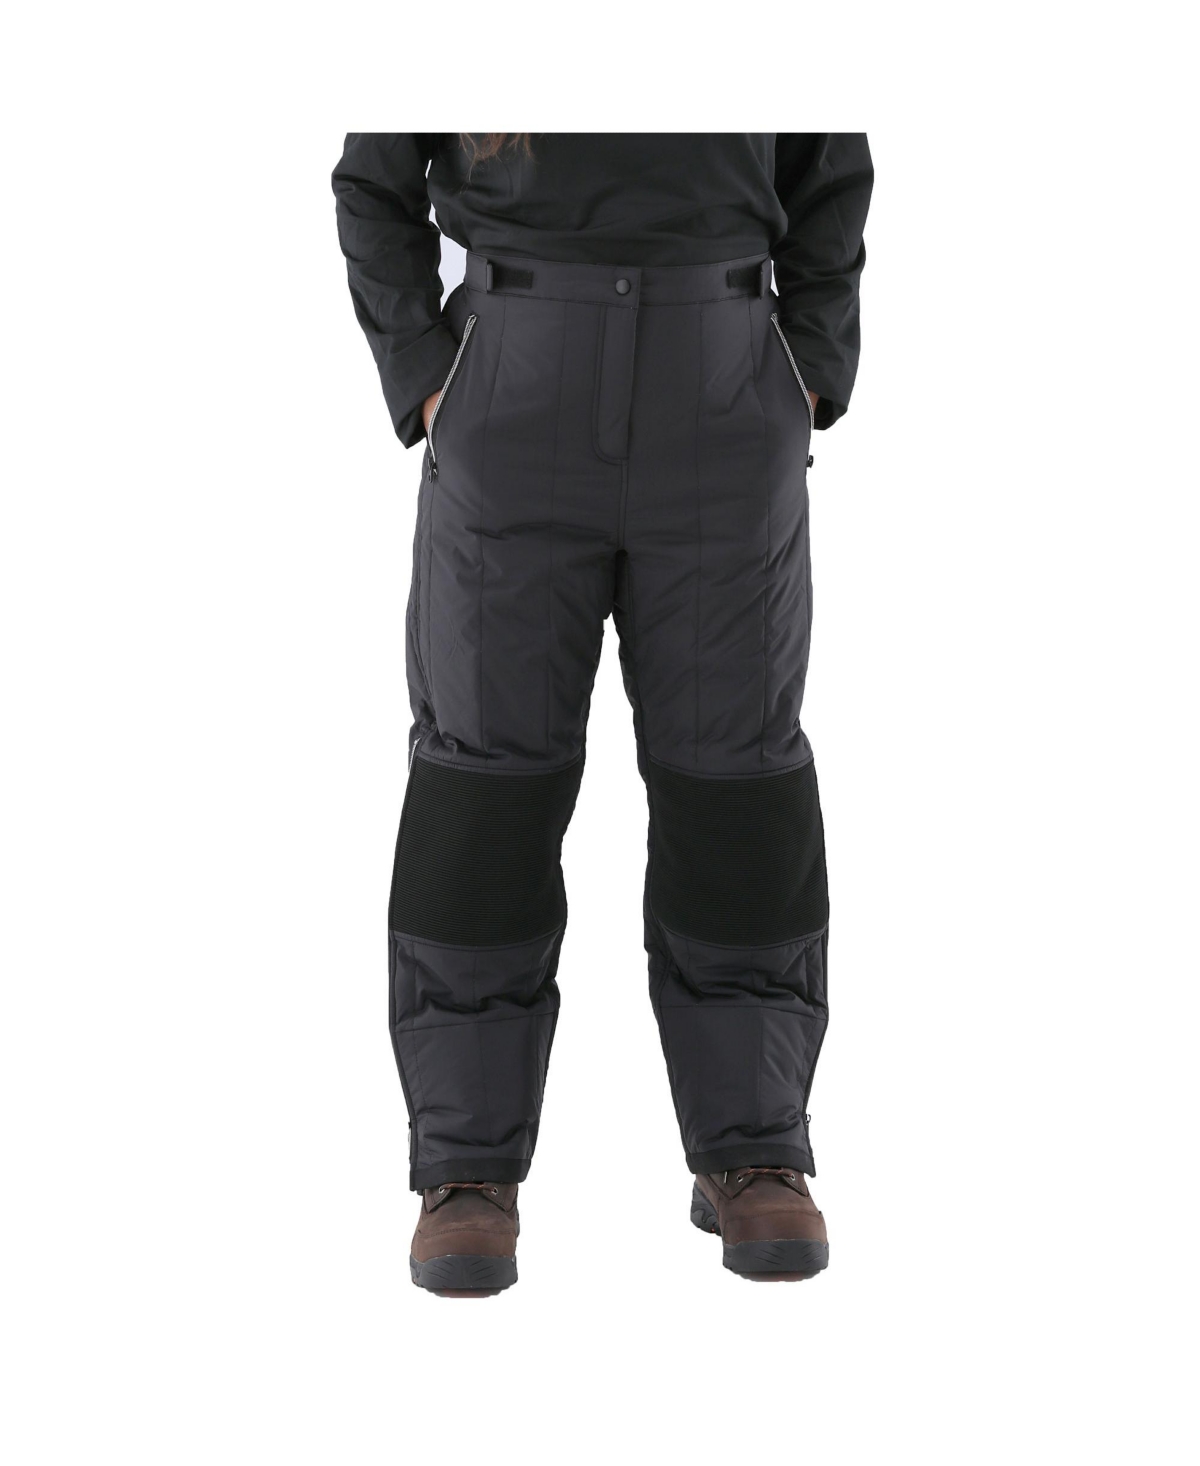 Women's Insulated Quilted Pants - Charcoal